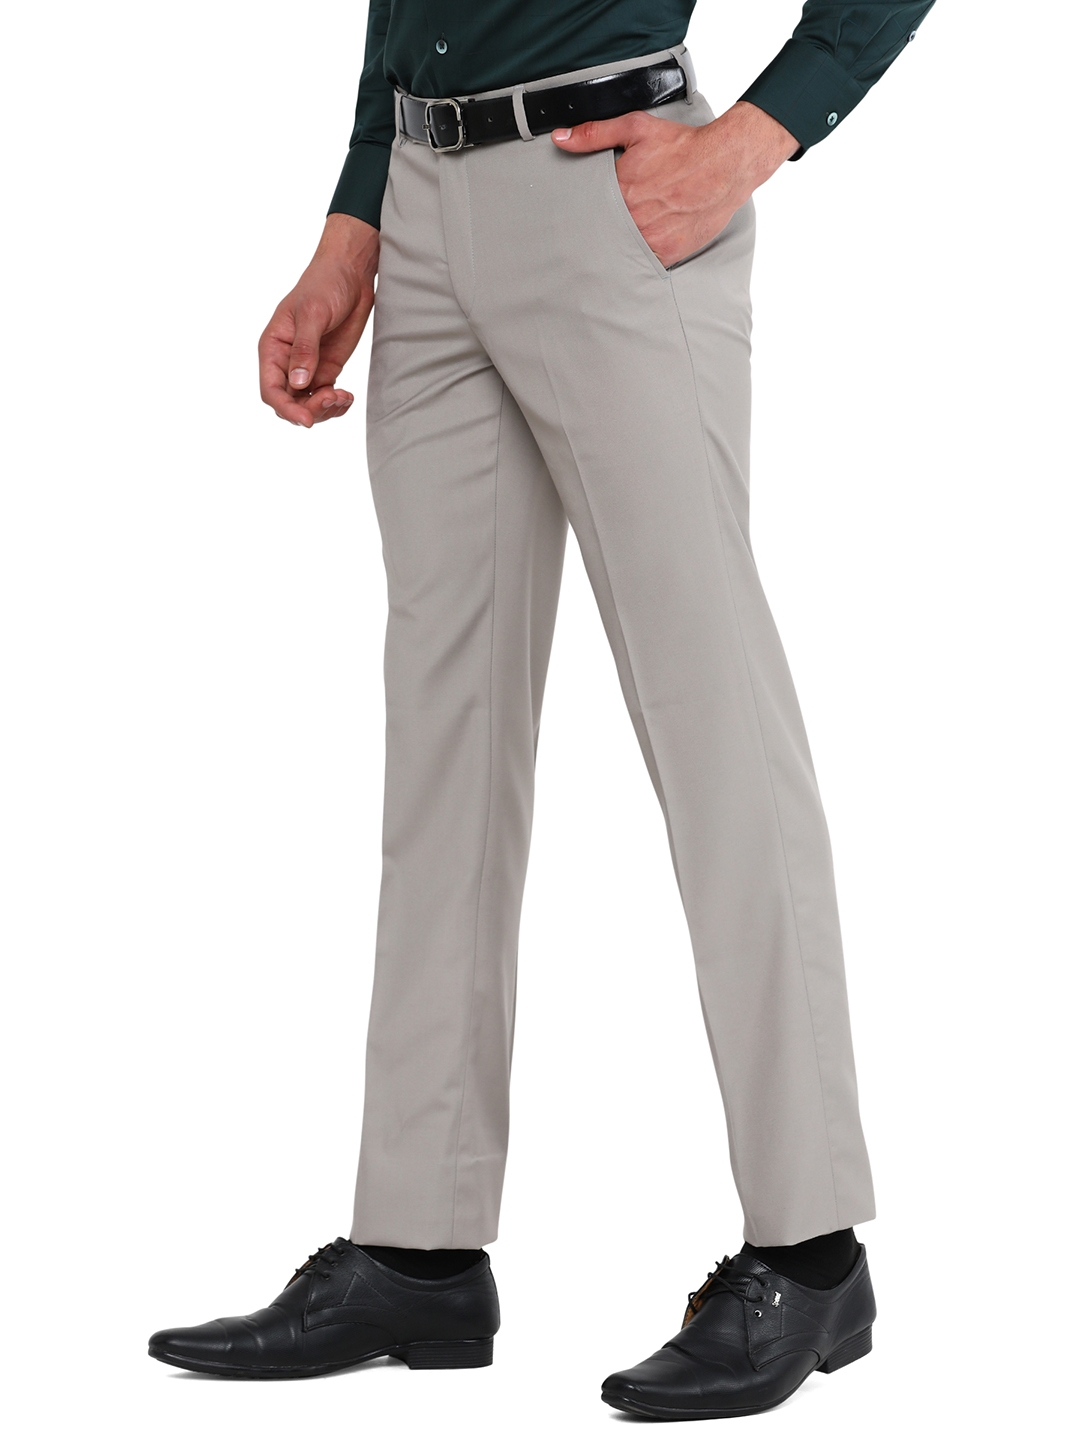 Keith & Paul Poly Cotton Grey Regular Slim Fit Formal Pants for Men Size 38  | Wholesale Prices | Tradeling